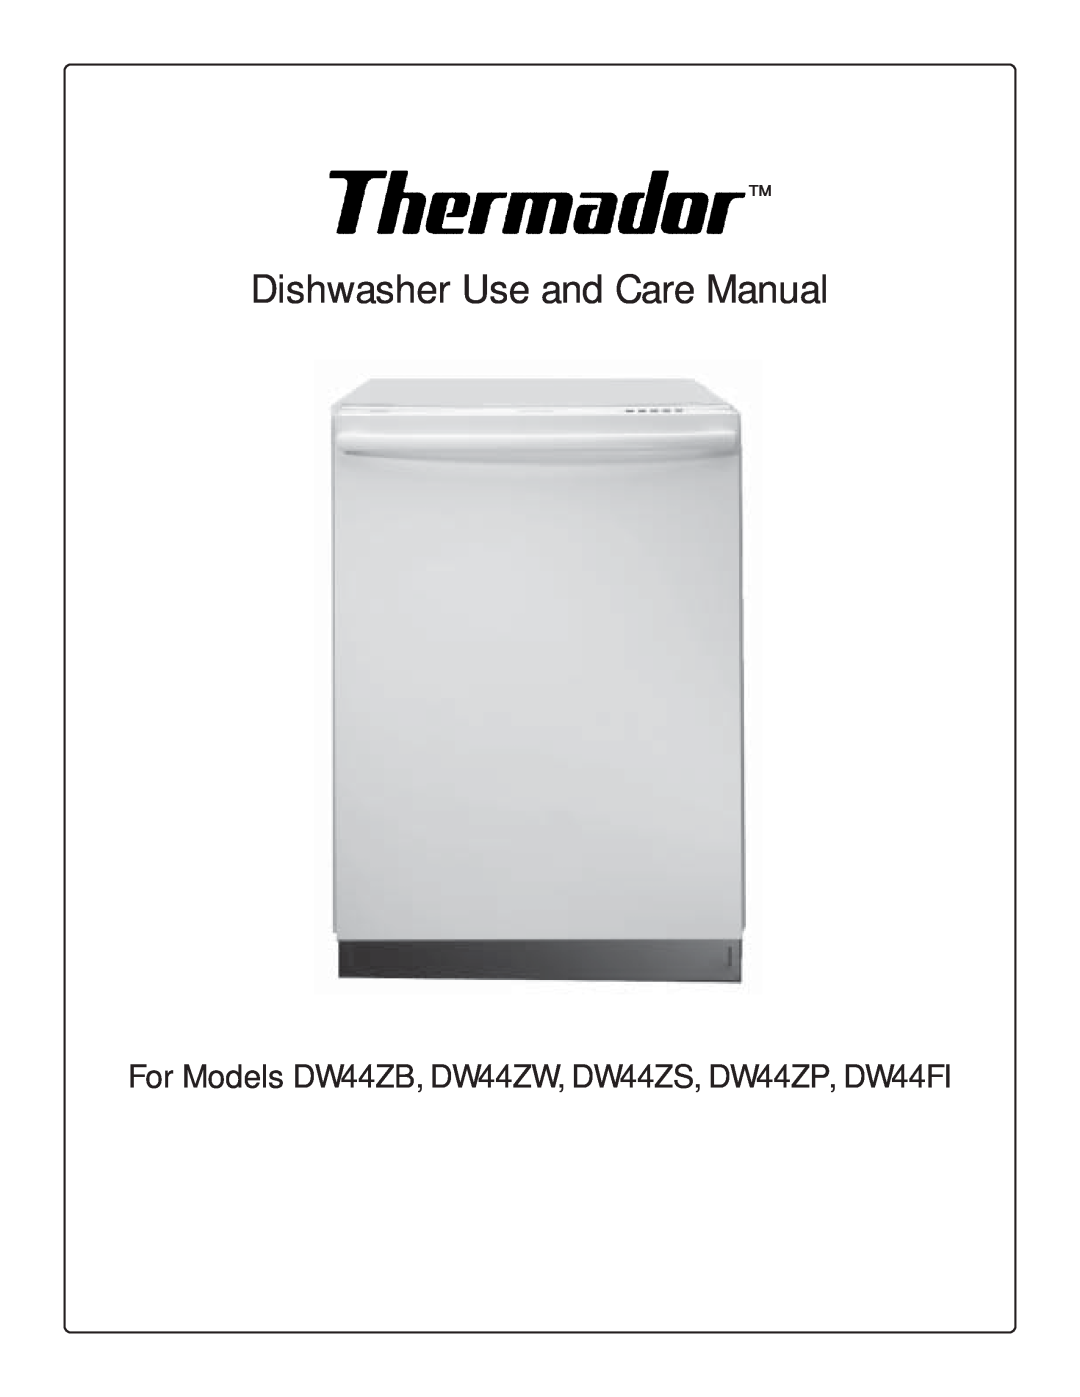 Thermador manual Dishwasher Use and Care Manual, For Models DW44ZB, DW44ZW, DW44ZS, DW44ZP, DW44FI 